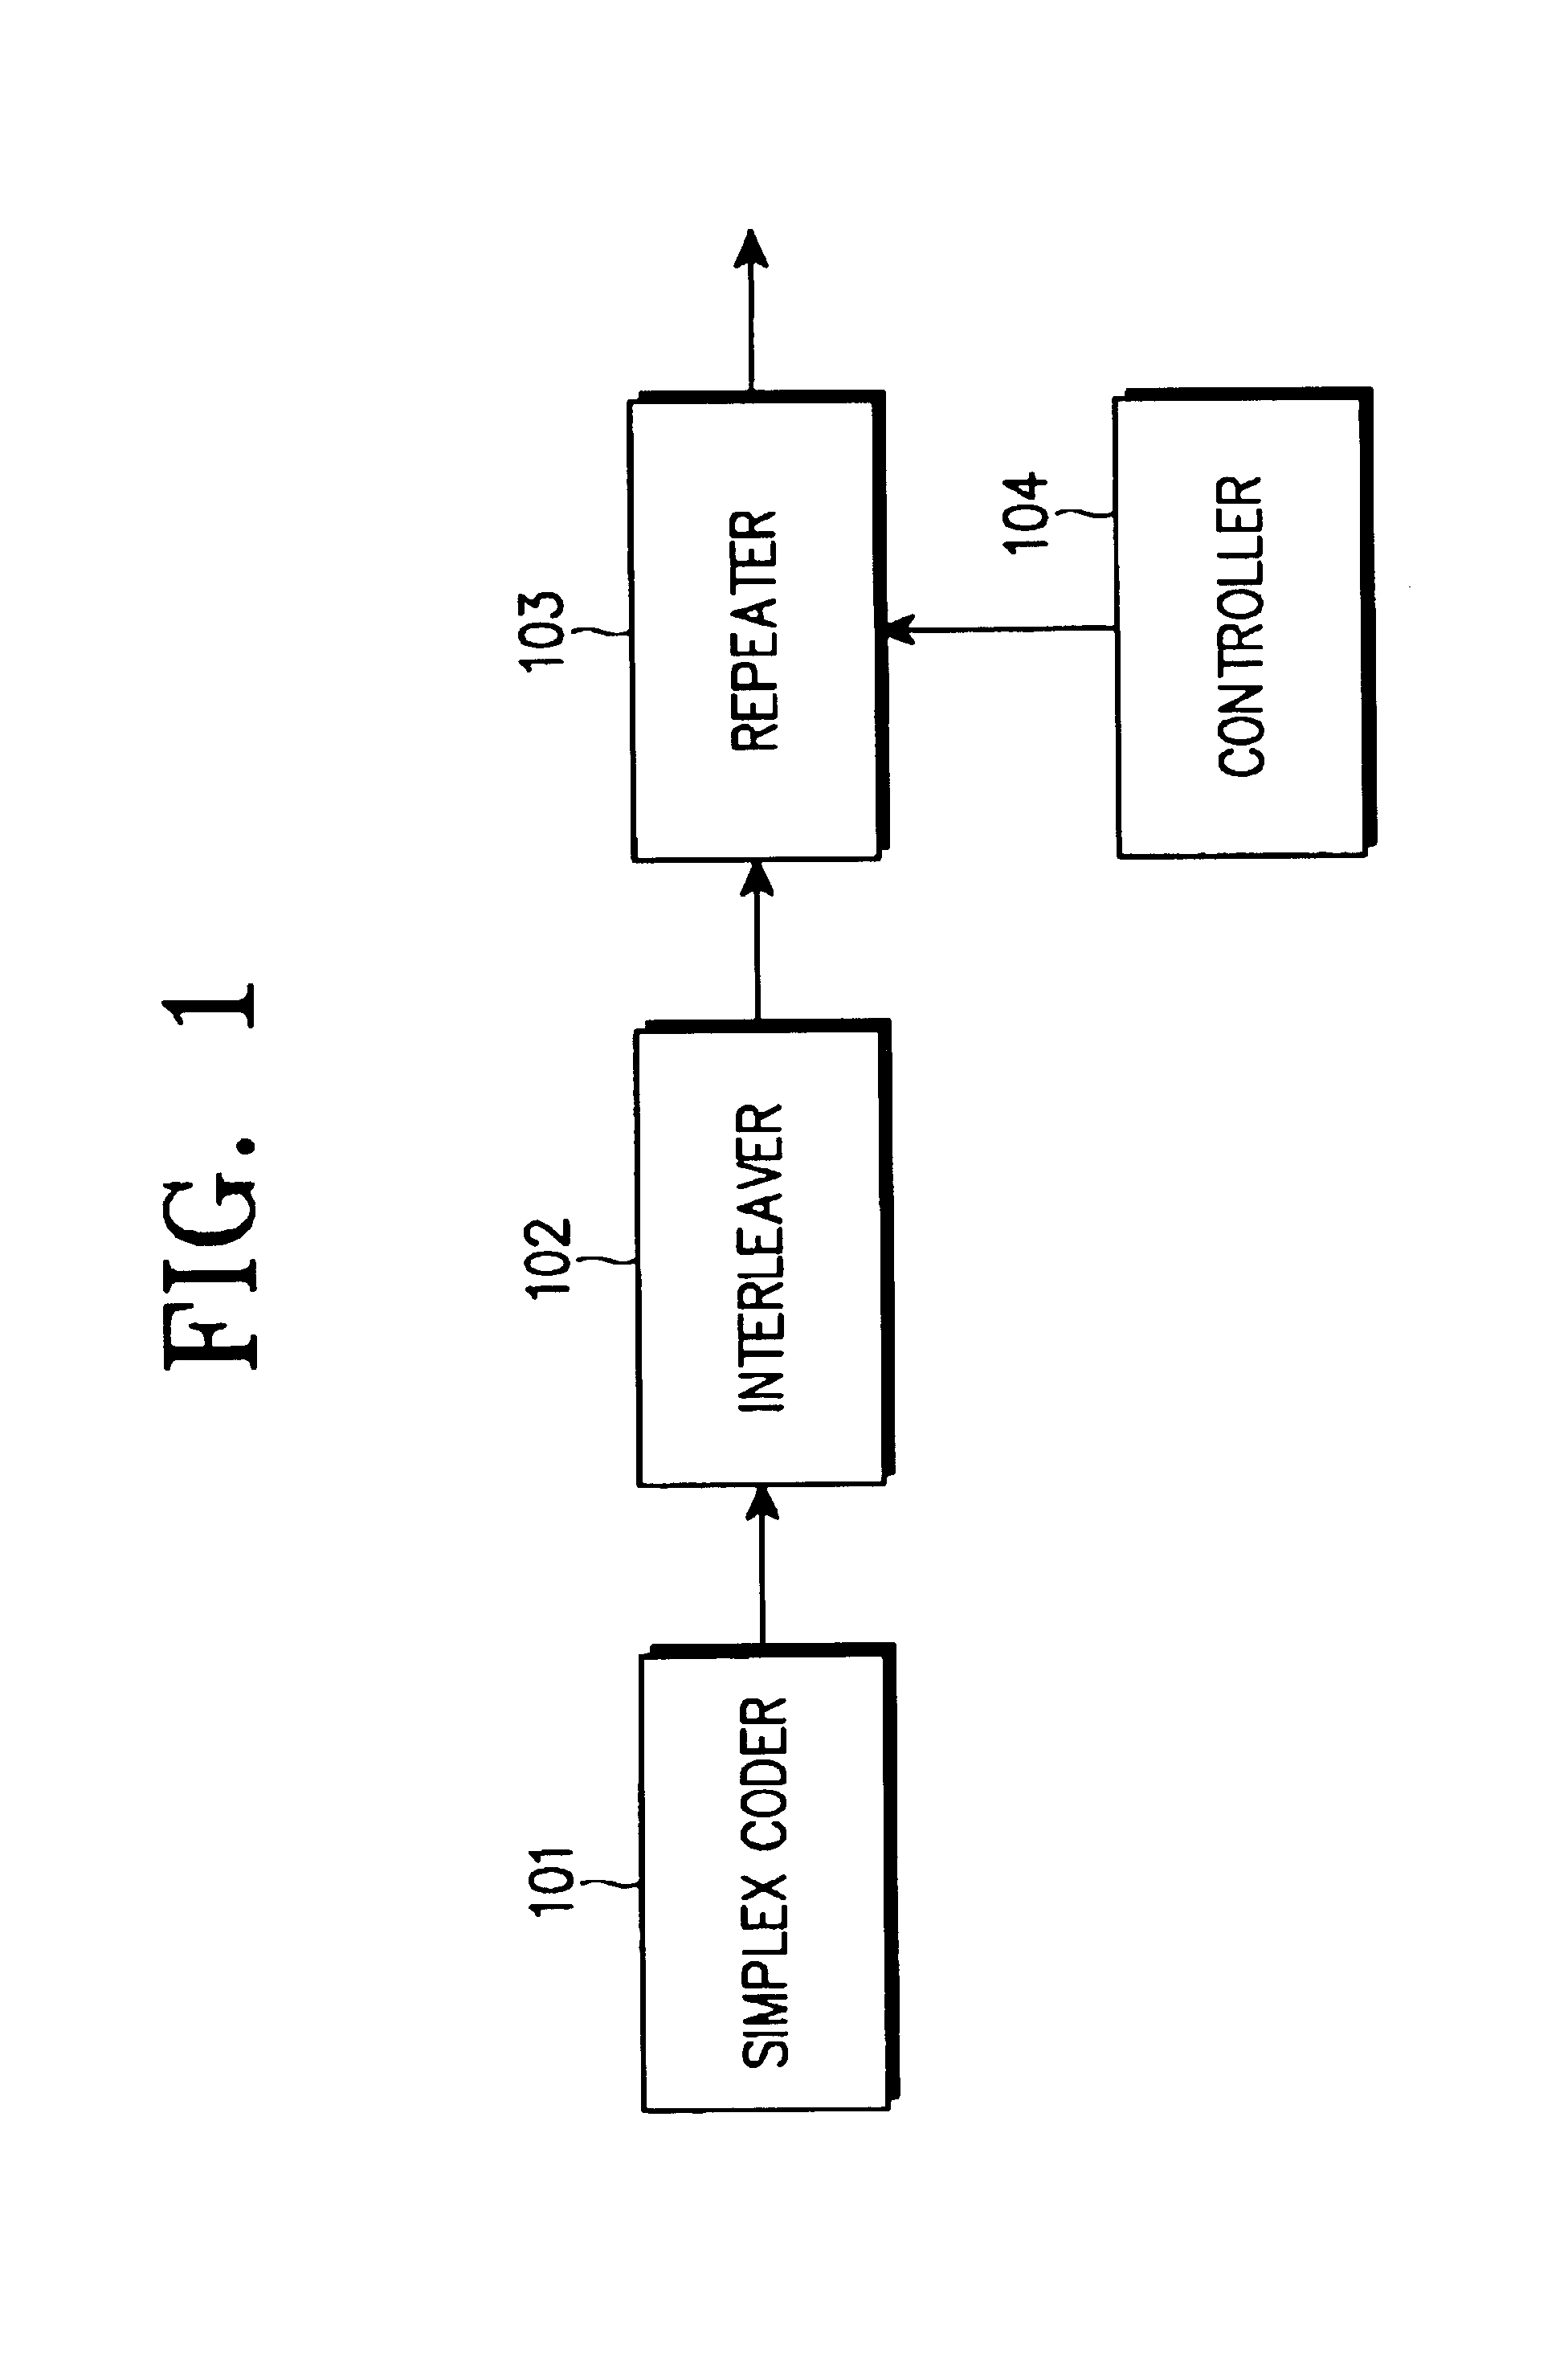 Apparatus and method for generating (n, 3) code and (n, 4) code using simplex codes